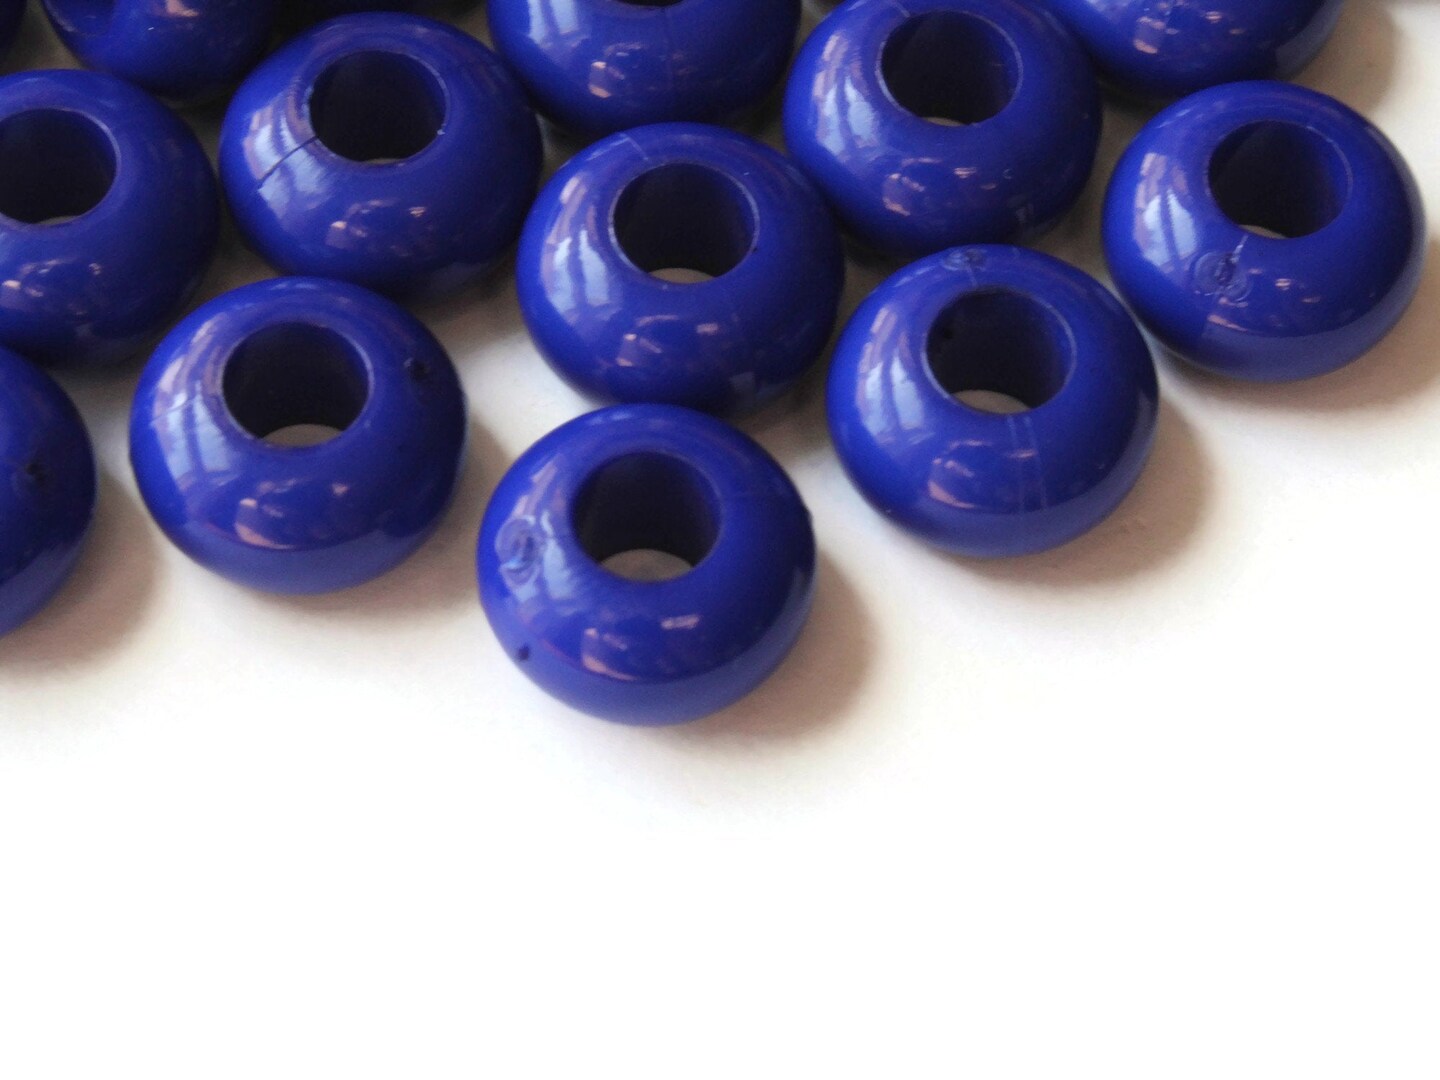 30 14mm x 8mm Large Hole Blue Beads Macrame Rondelle Plastic Bead by Smileyboy | Michaels